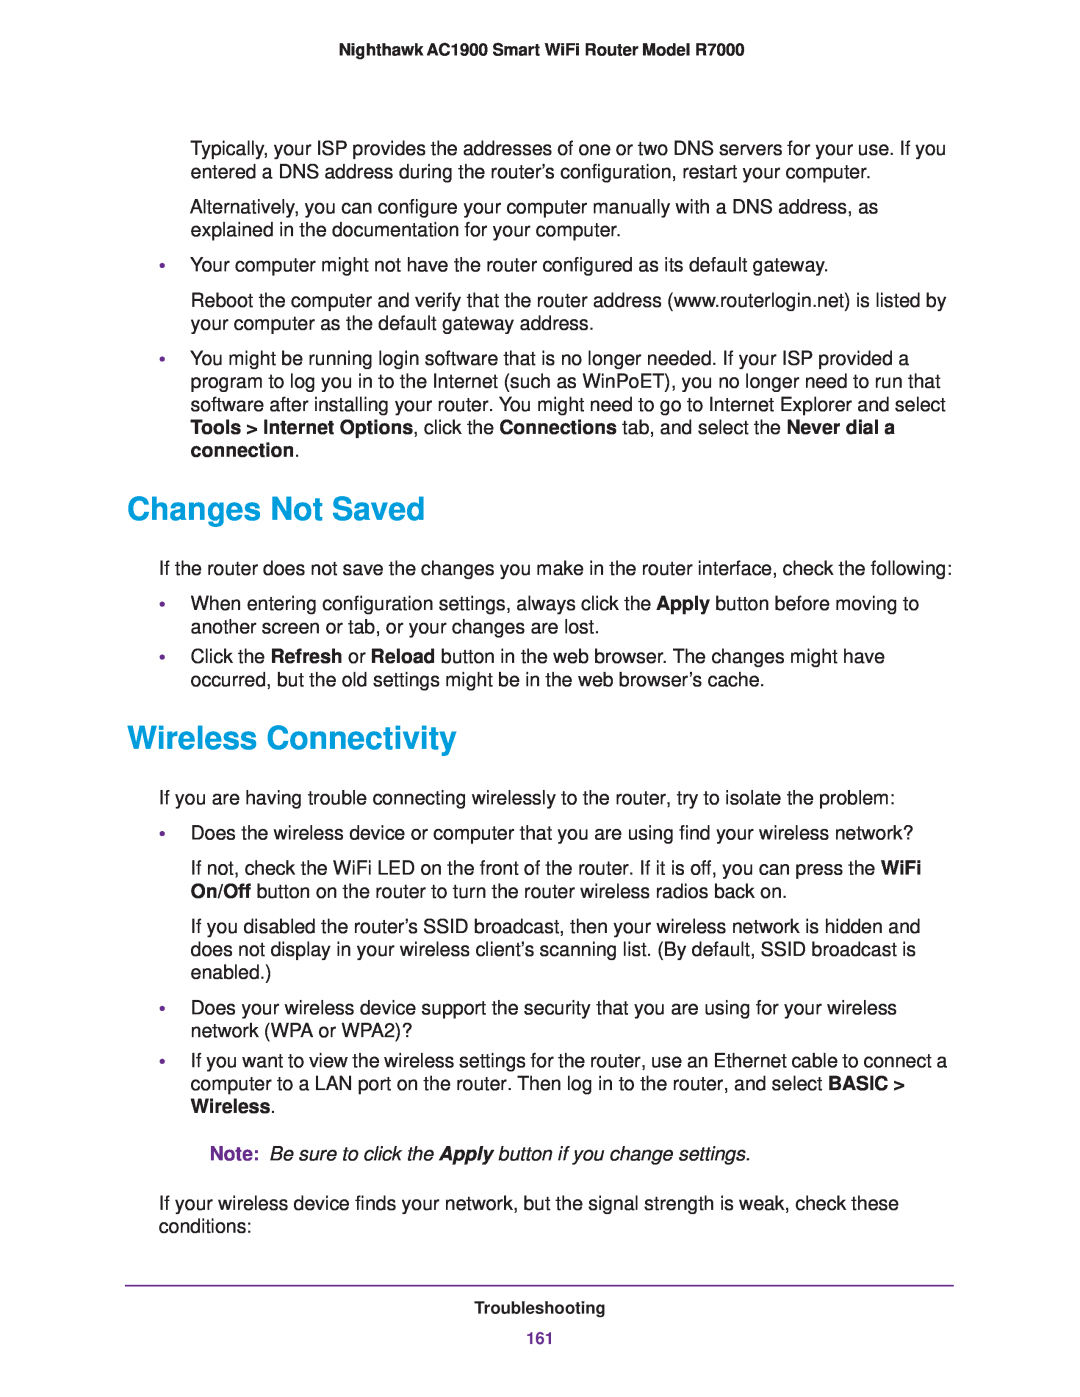 NETGEAR R7000 Changes Not Saved, Wireless Connectivity, Note Be sure to click the Apply button if you change settings 